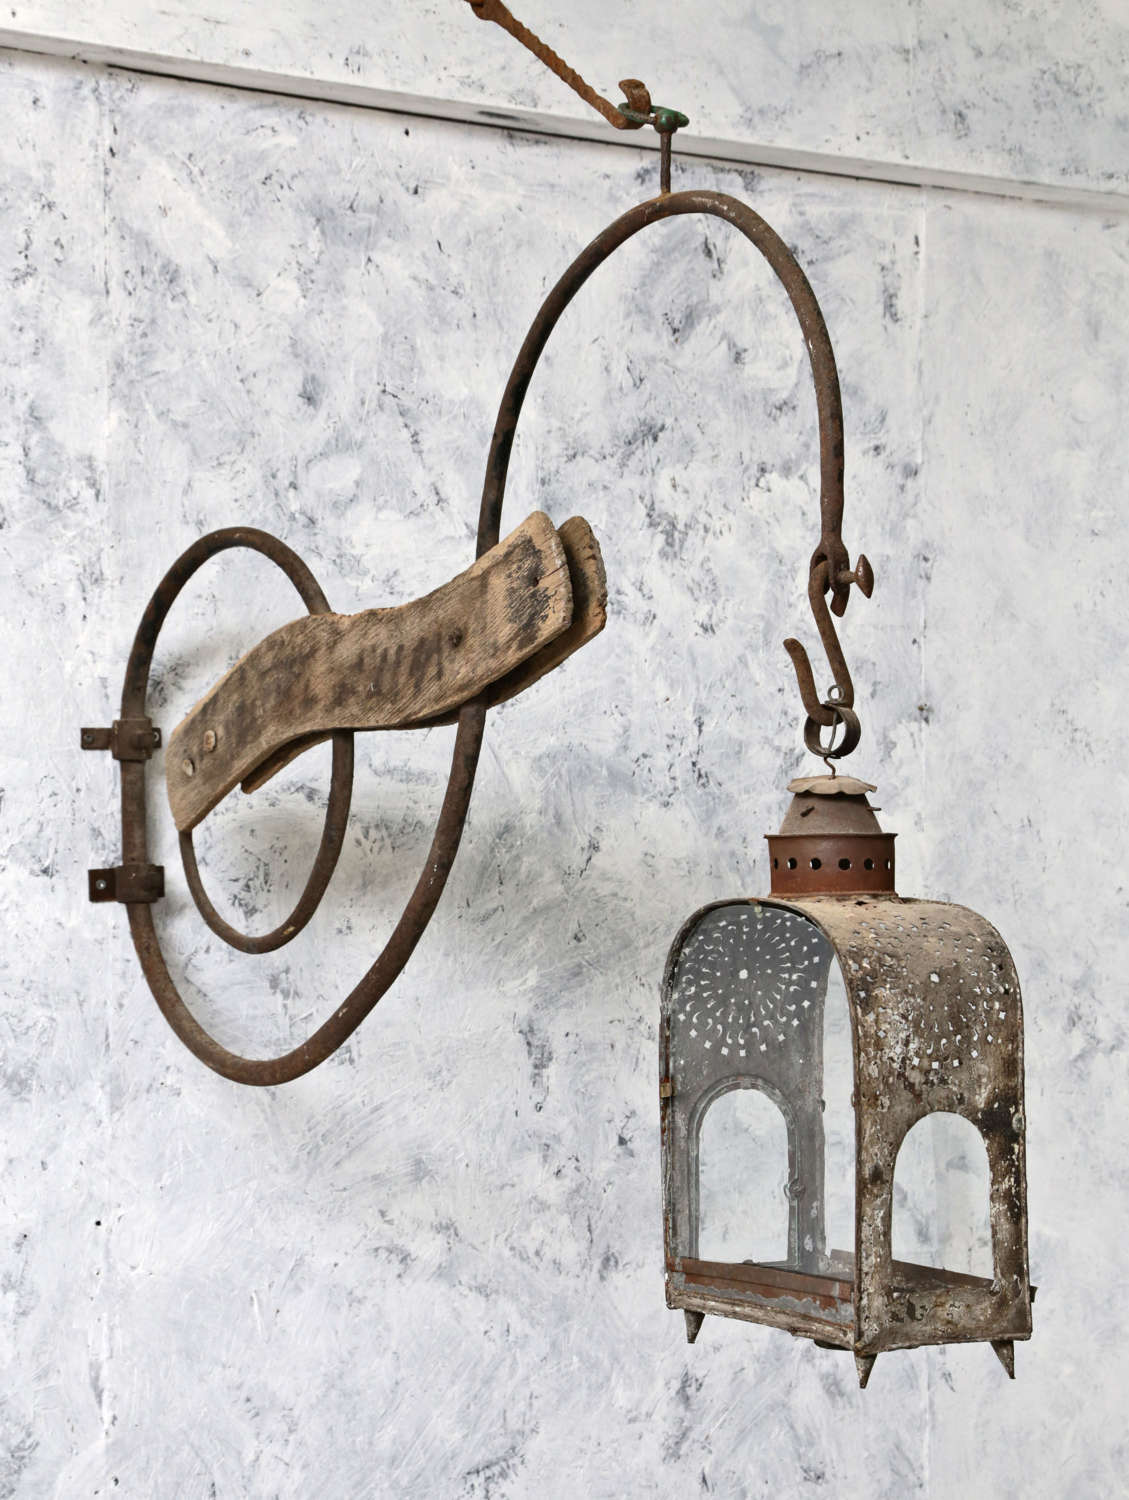 18th century French shop sign with lantern